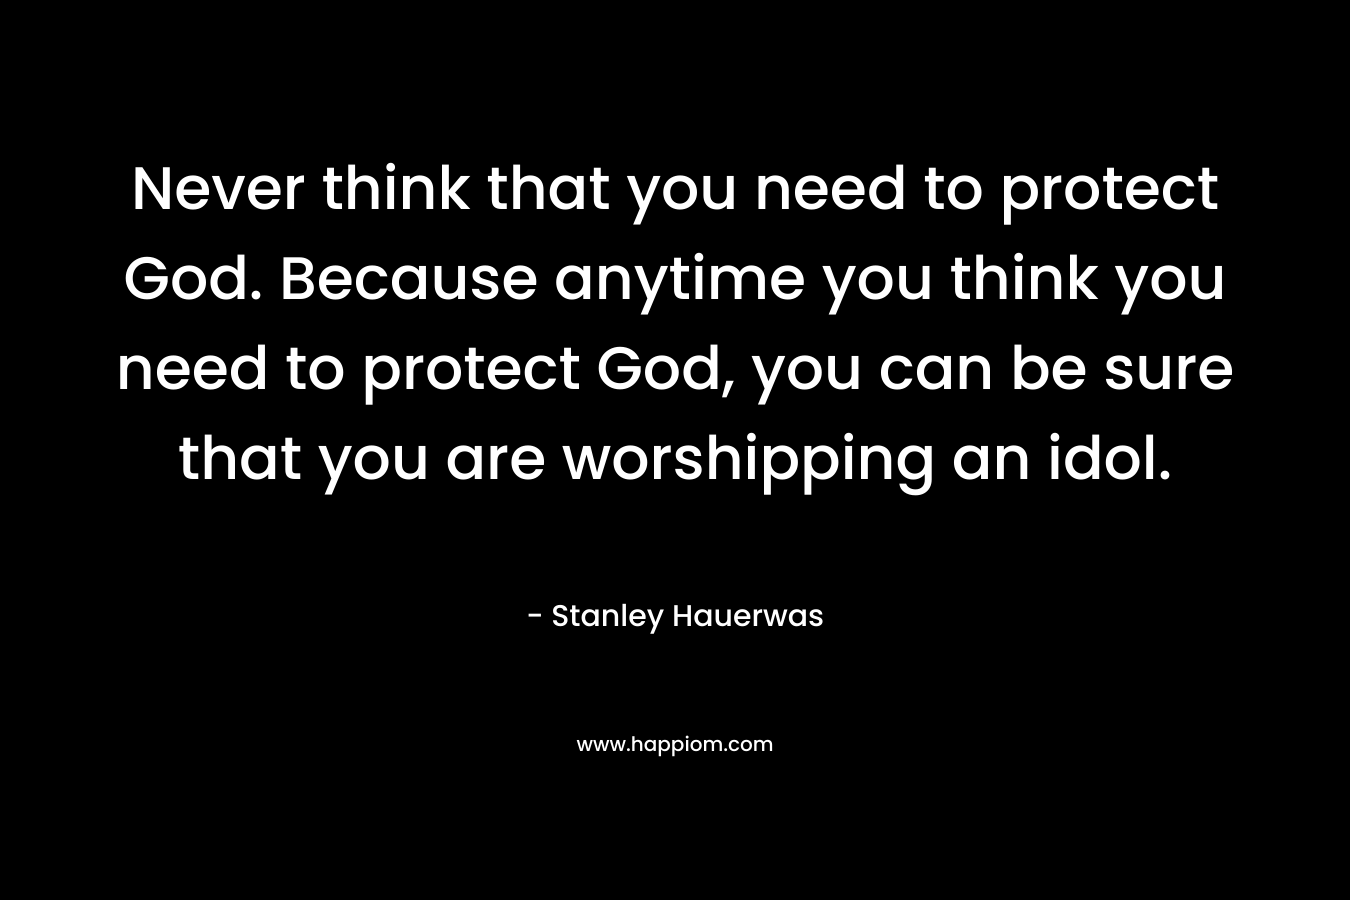 Never think that you need to protect God. Because anytime you think you need to protect God, you can be sure that you are worshipping an idol.